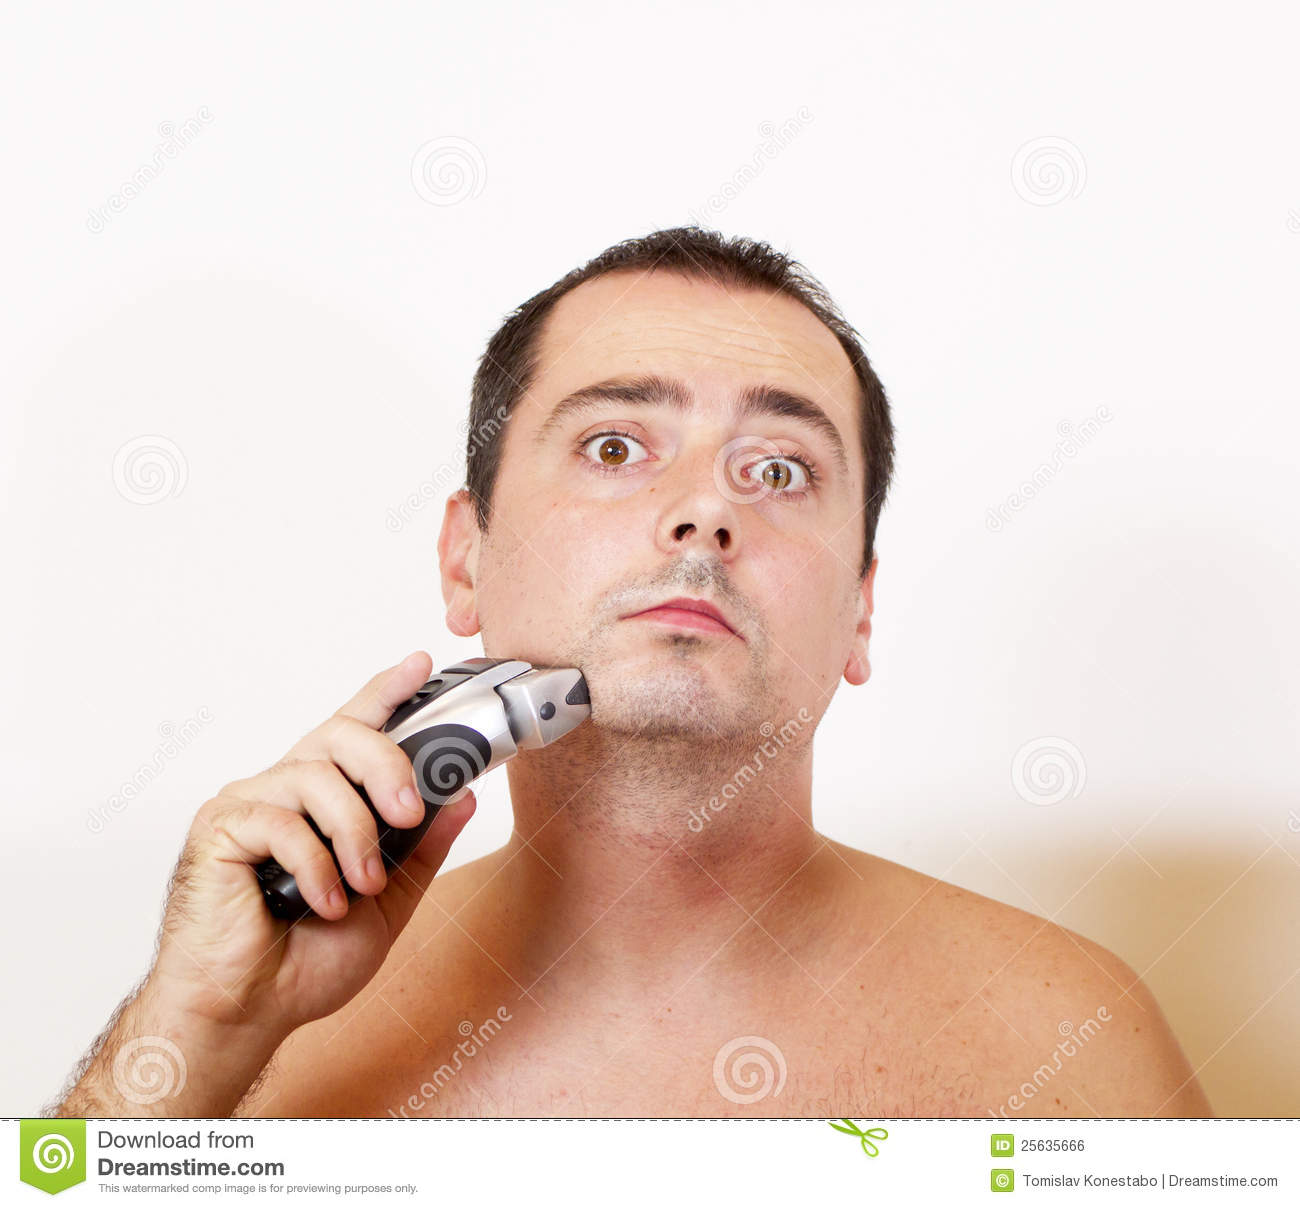 Man Shaving His Beard With An Electric Razor Royalty Free Stock Image